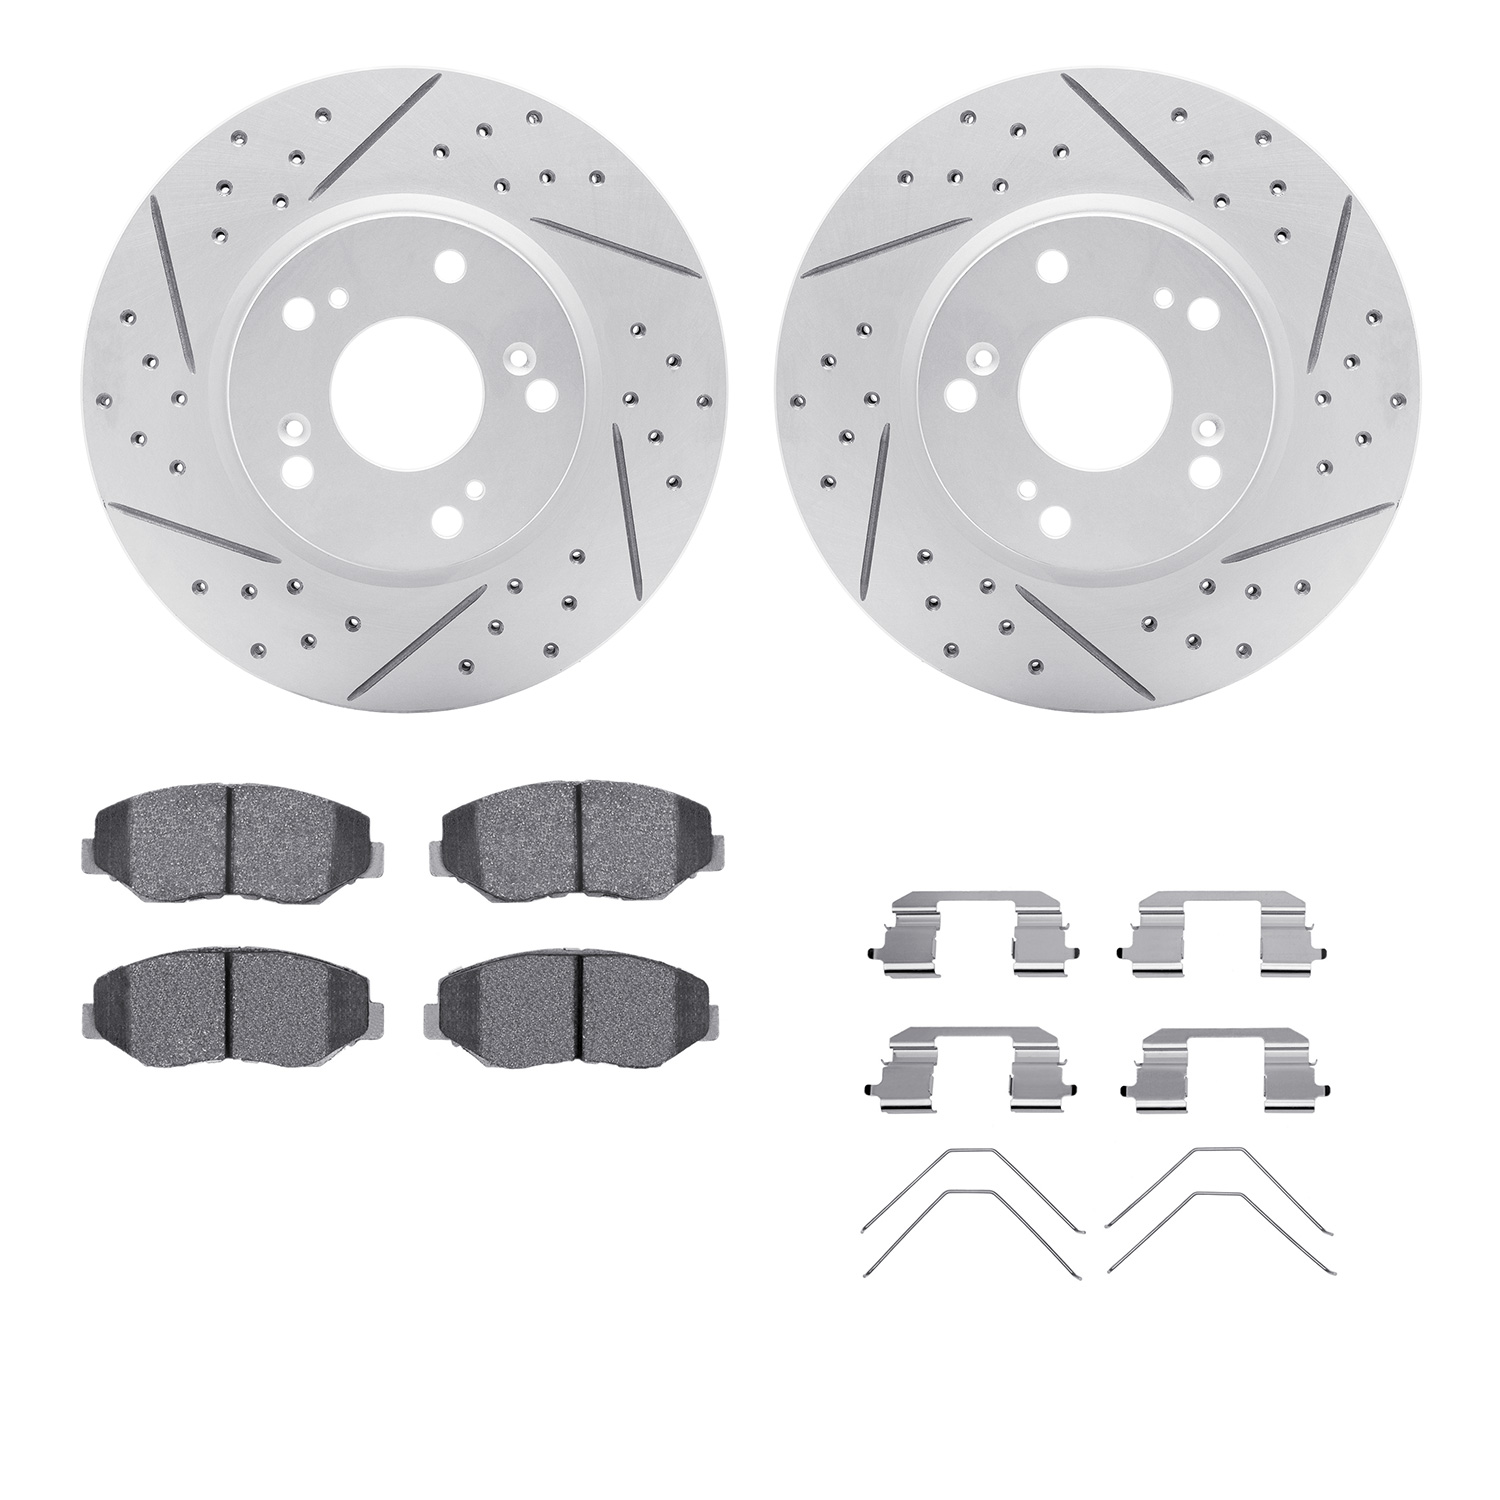 2512-59037 Geoperformance Drilled/Slotted Rotors w/5000 Advanced Brake Pads Kit & Hardware, 2003-2017 Acura/Honda, Position: Fro